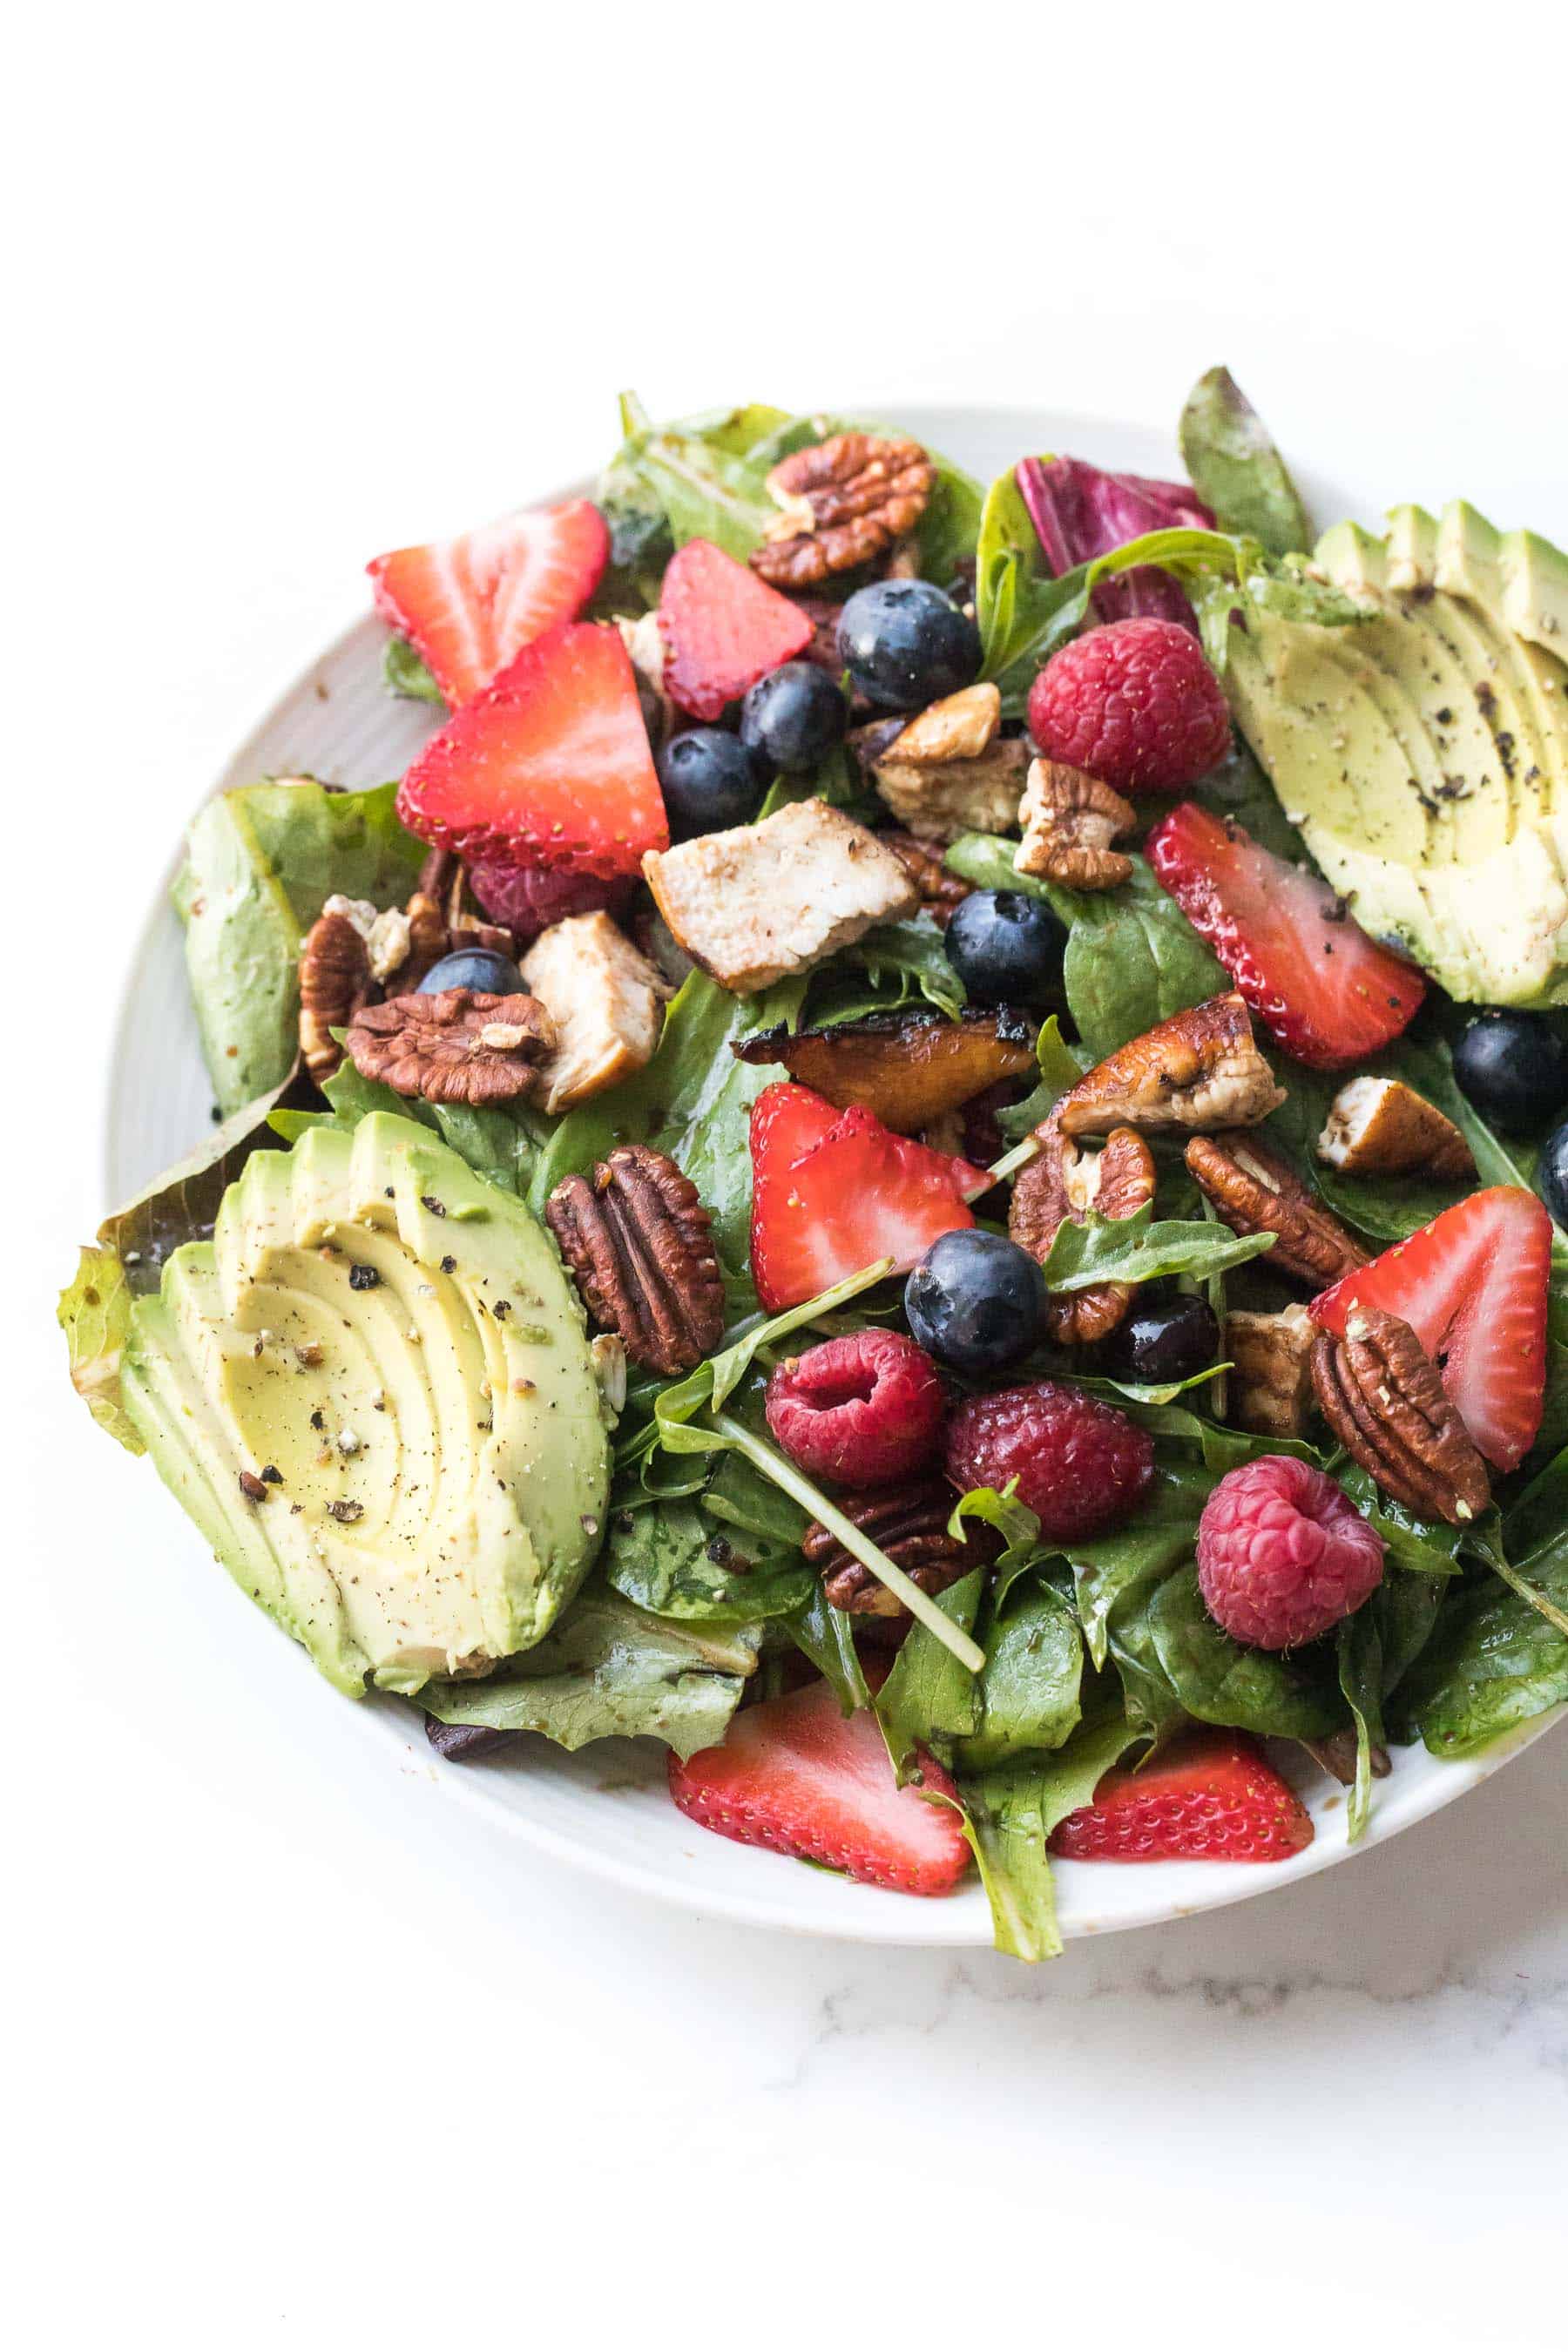 salad with strawberries, blueberries, raspberries, chicken, avocado + pecans on a white plate and background